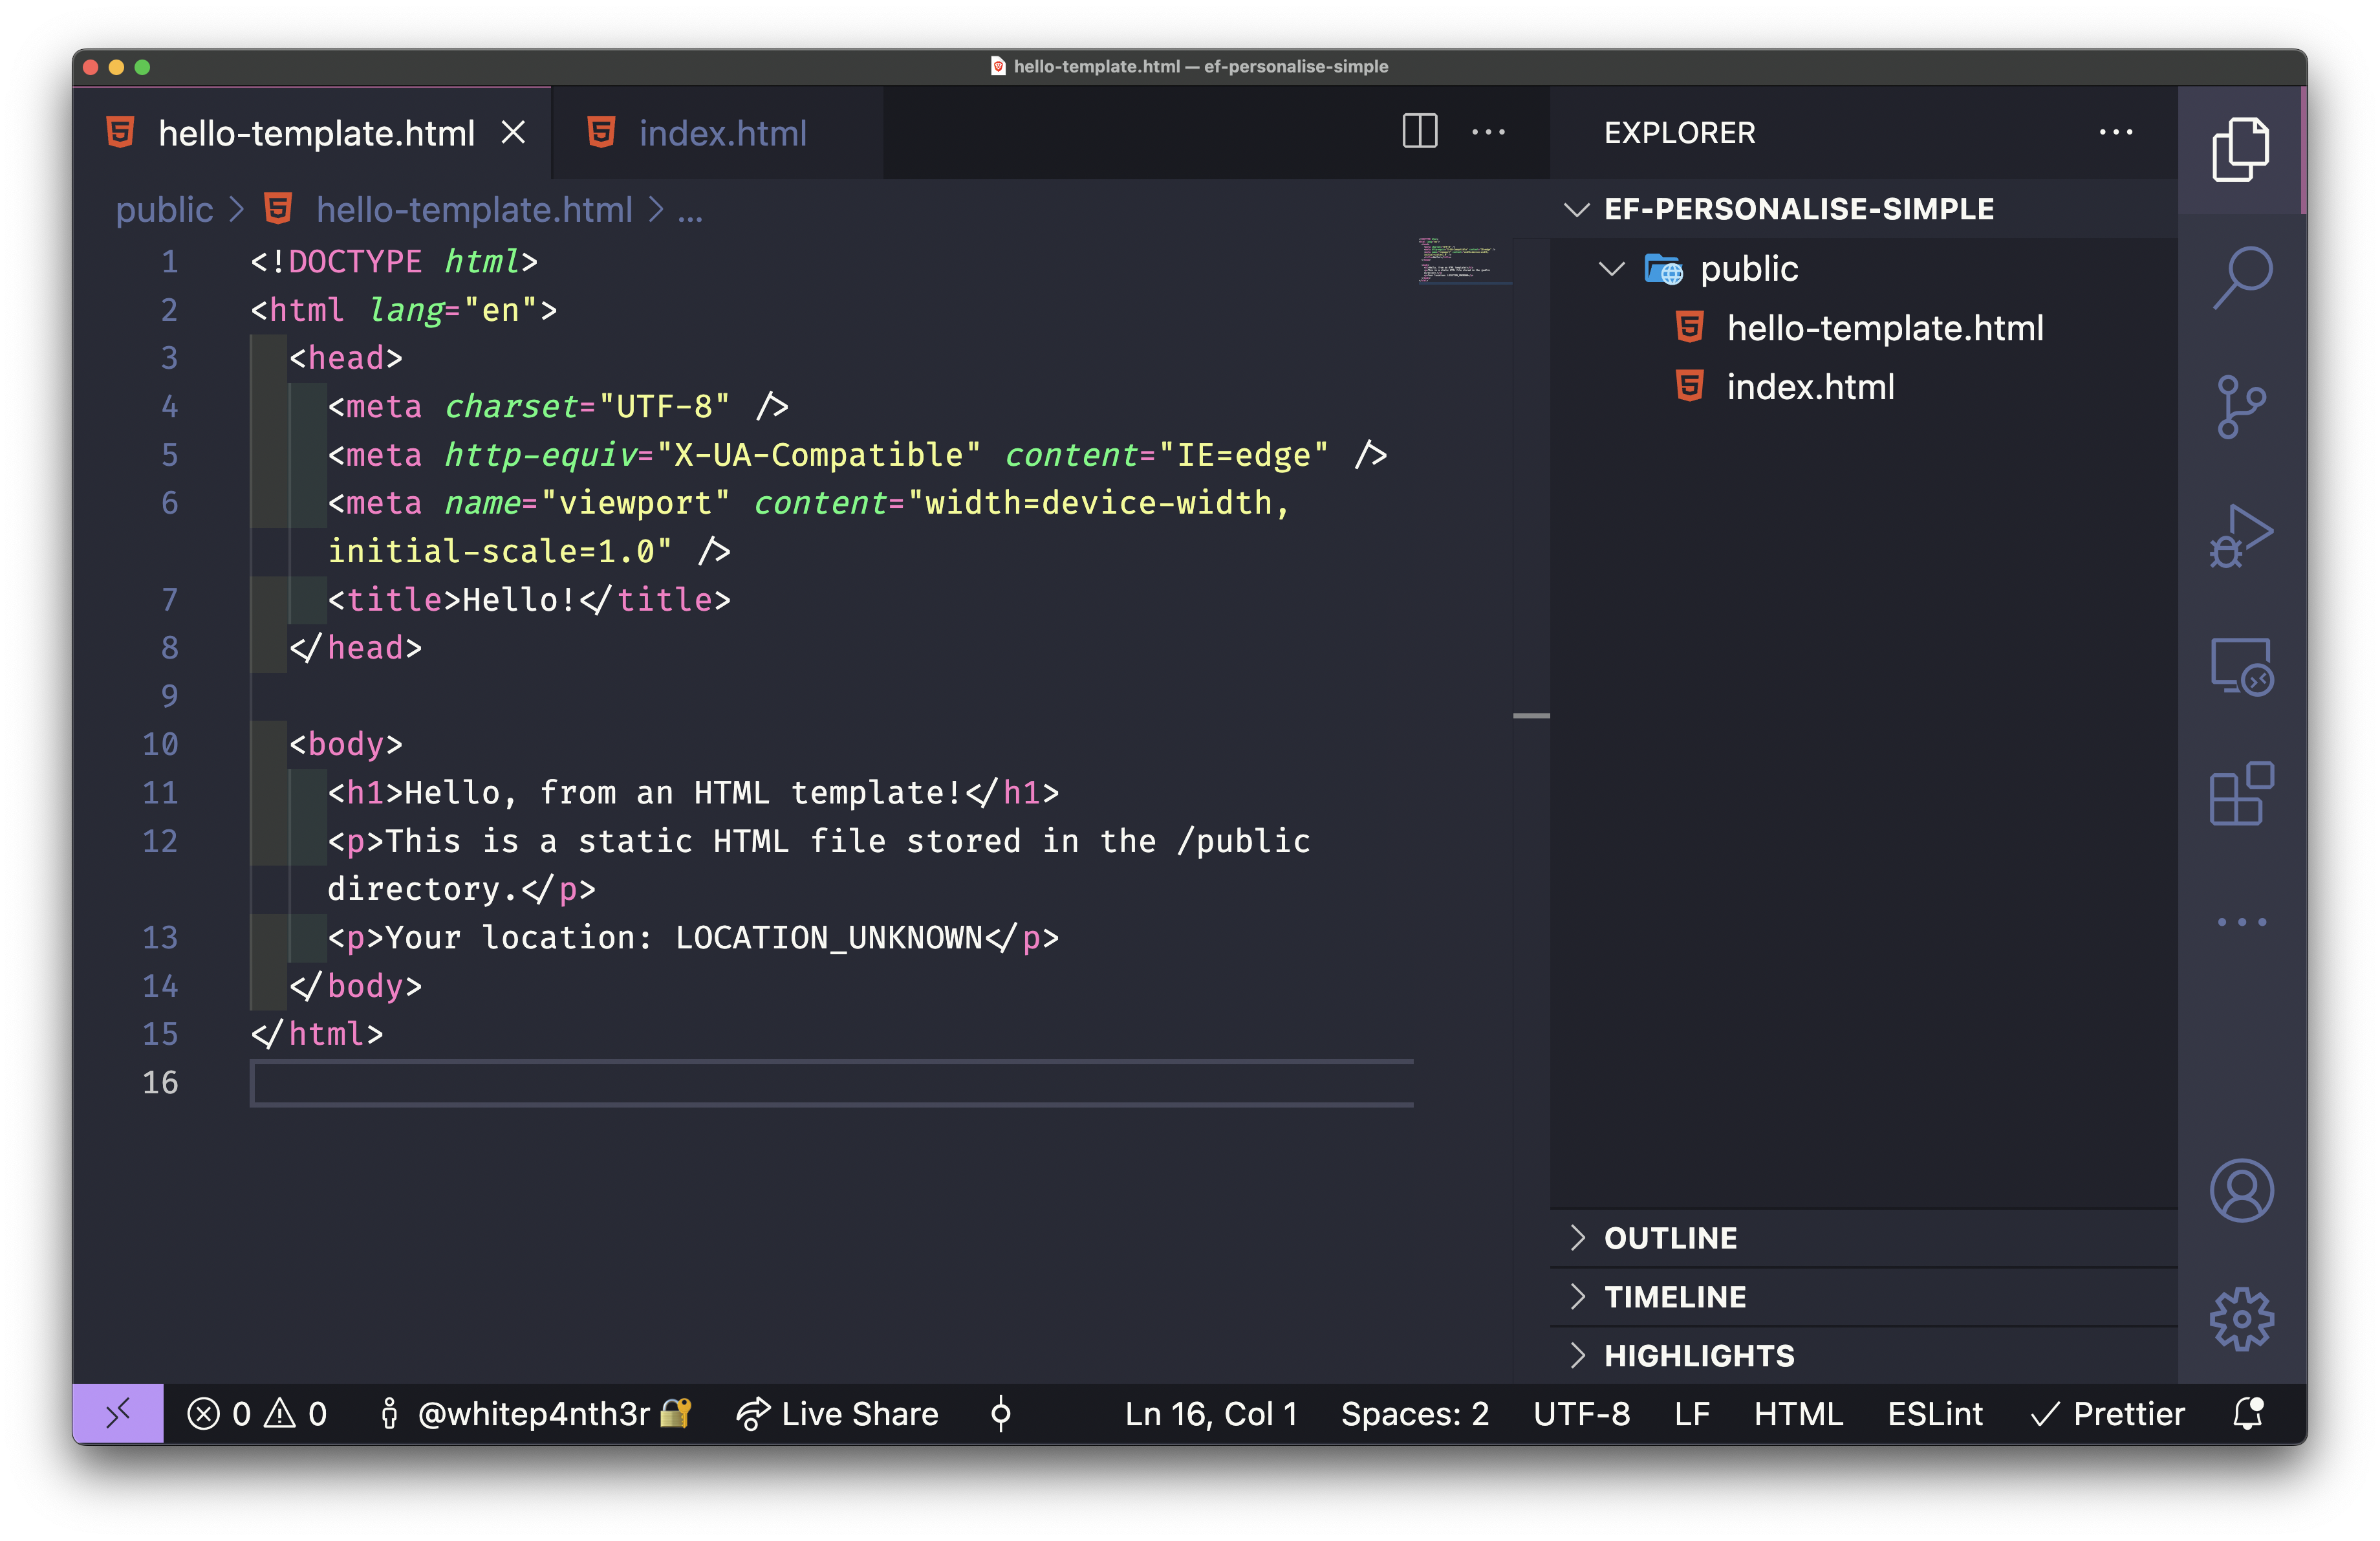 A screenshot of VSCode, showing two html files in a public directory. The visible code is the hello template file with the location data placeholder.